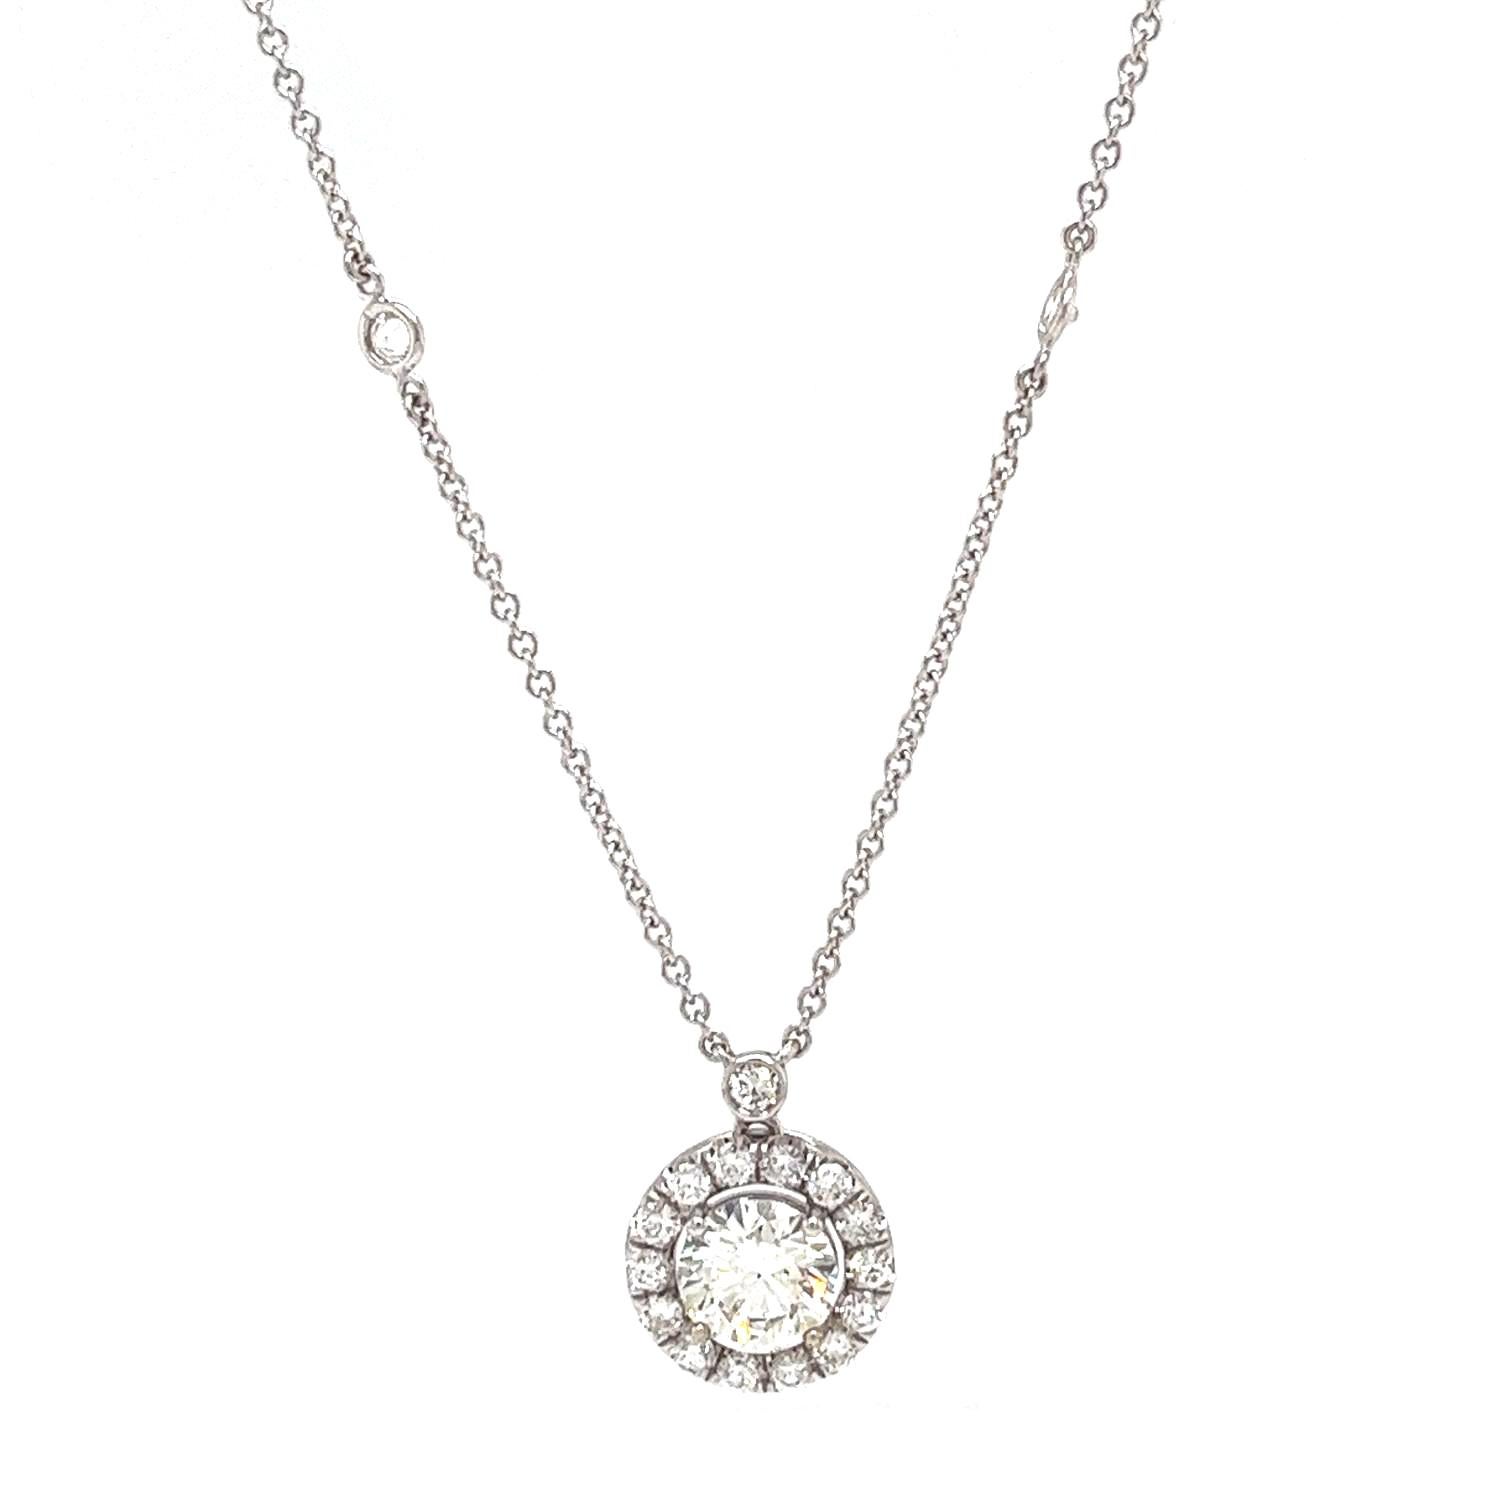 This magnificent necklace has a stunning natural round halo diamond pendant in 14K white gold. It has VS1 Clarity and J Colour, totaling 1.77 Carat. This ring also has round pave diamonds with VS1 Clarity and H Colour, providing delicate beauty and